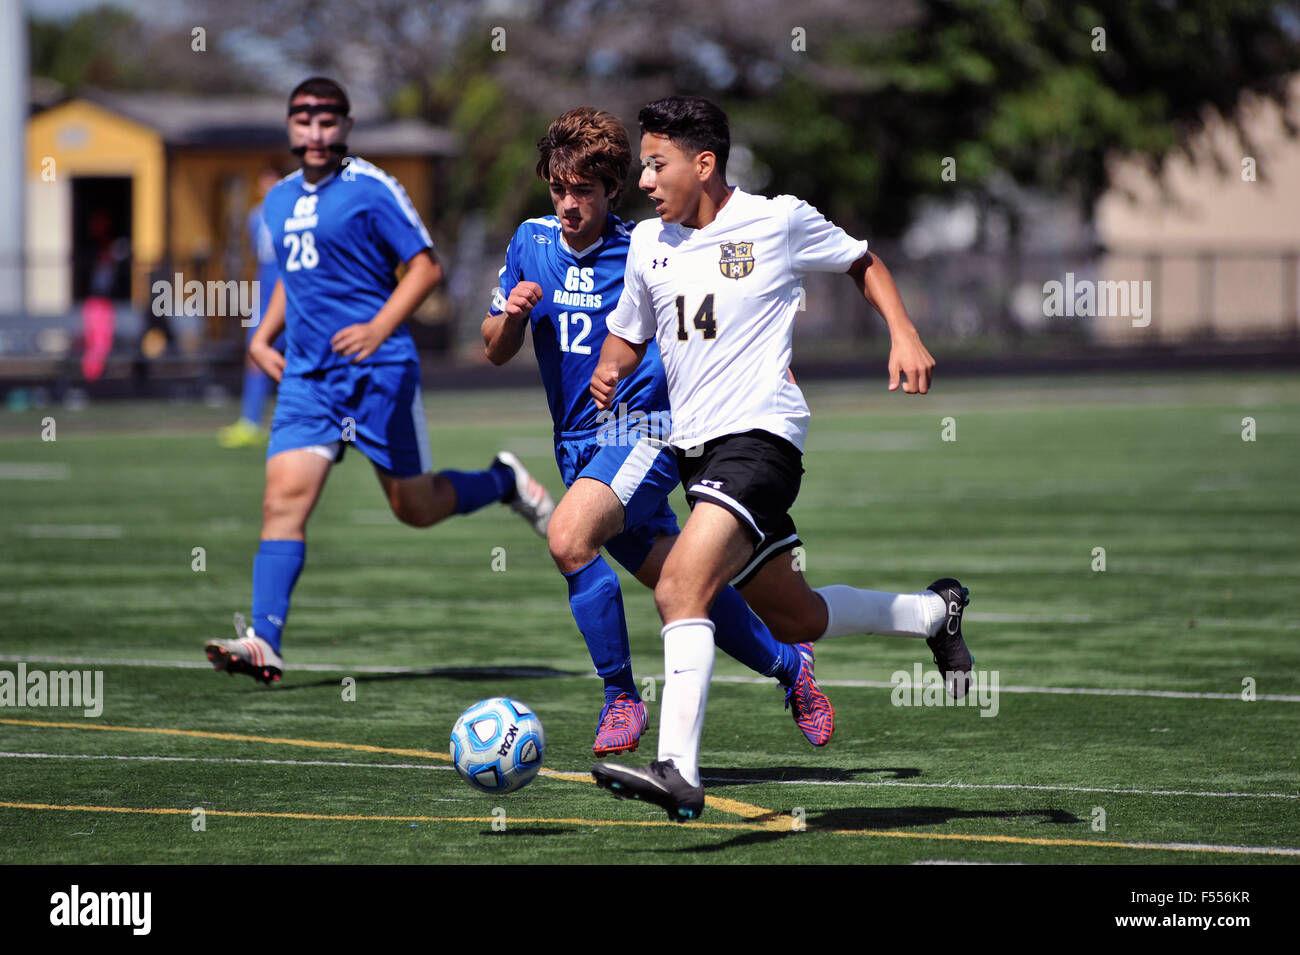 A high school striker dribbles the ball past midfield as he attempts to set up a scoring opportunity for his team. USA. Stock Photo